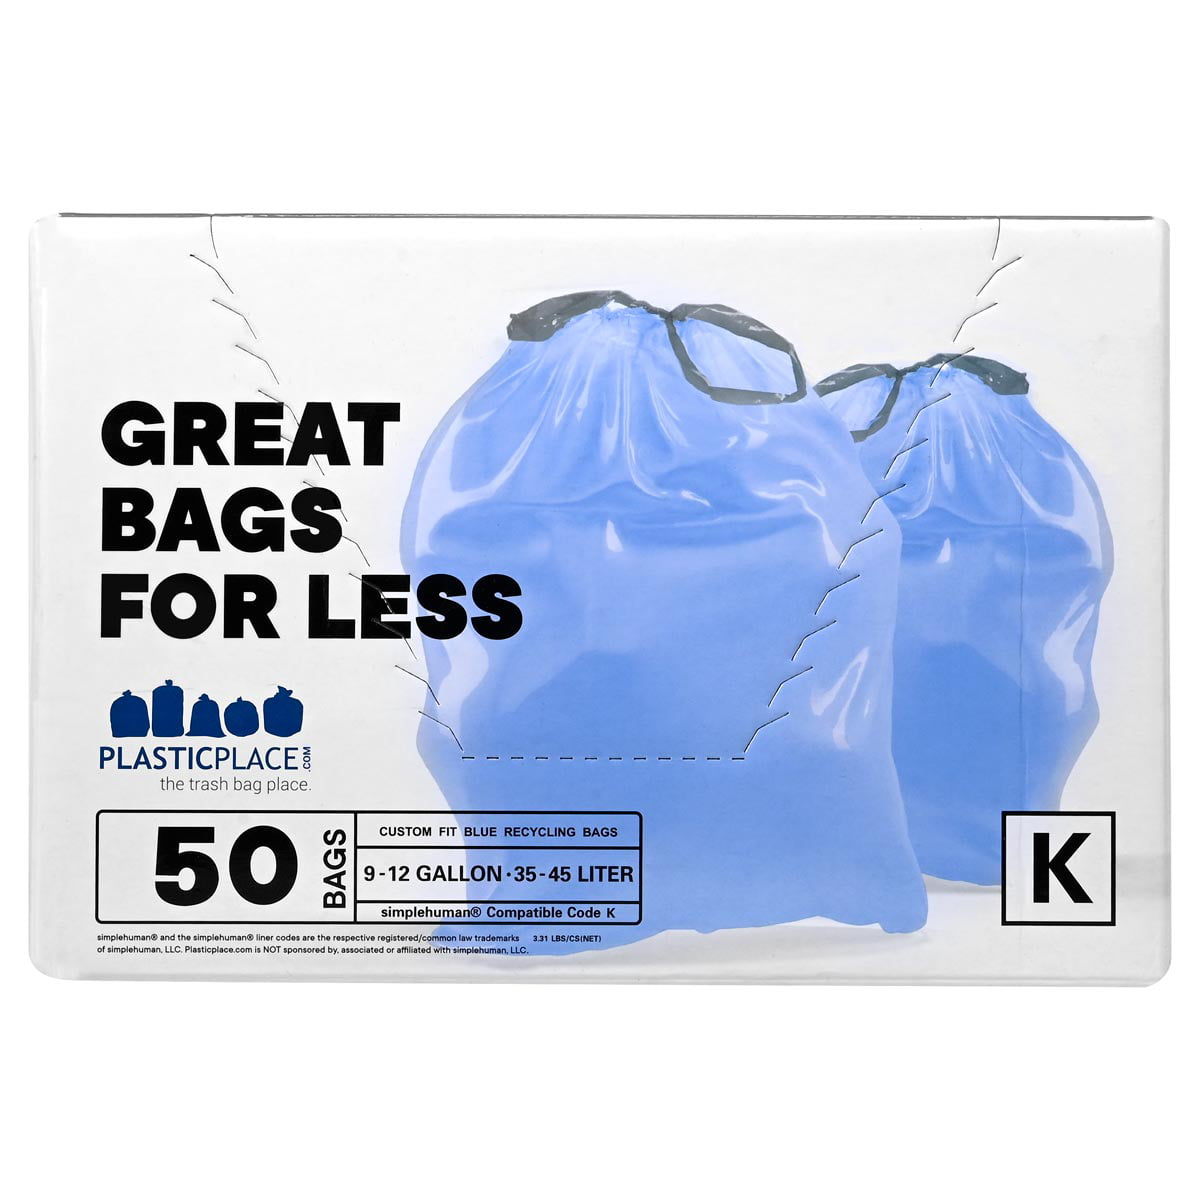 Plasticplace 4.2-4.8 Gallon Simplehuman®* Compatible Blue Trash Bags Code  V, 200 Garbage Bags